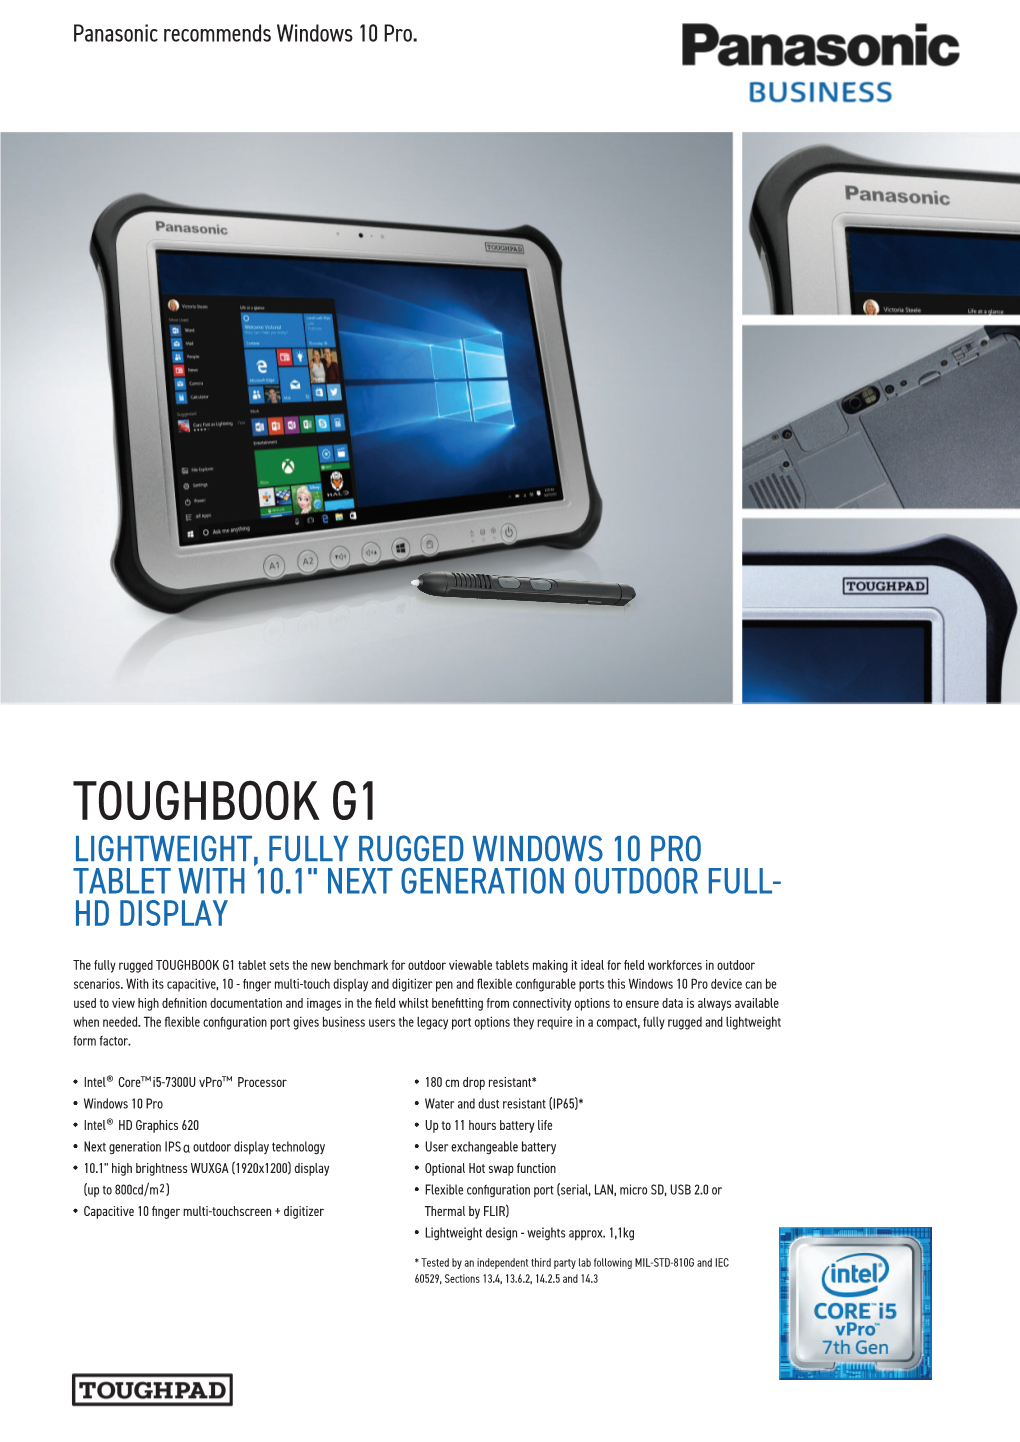 Toughbook G1 Lightweight, Fully Rugged Windows 10 Pro Tablet with 10.1" Next Generation Outdoor Full- Hd Display